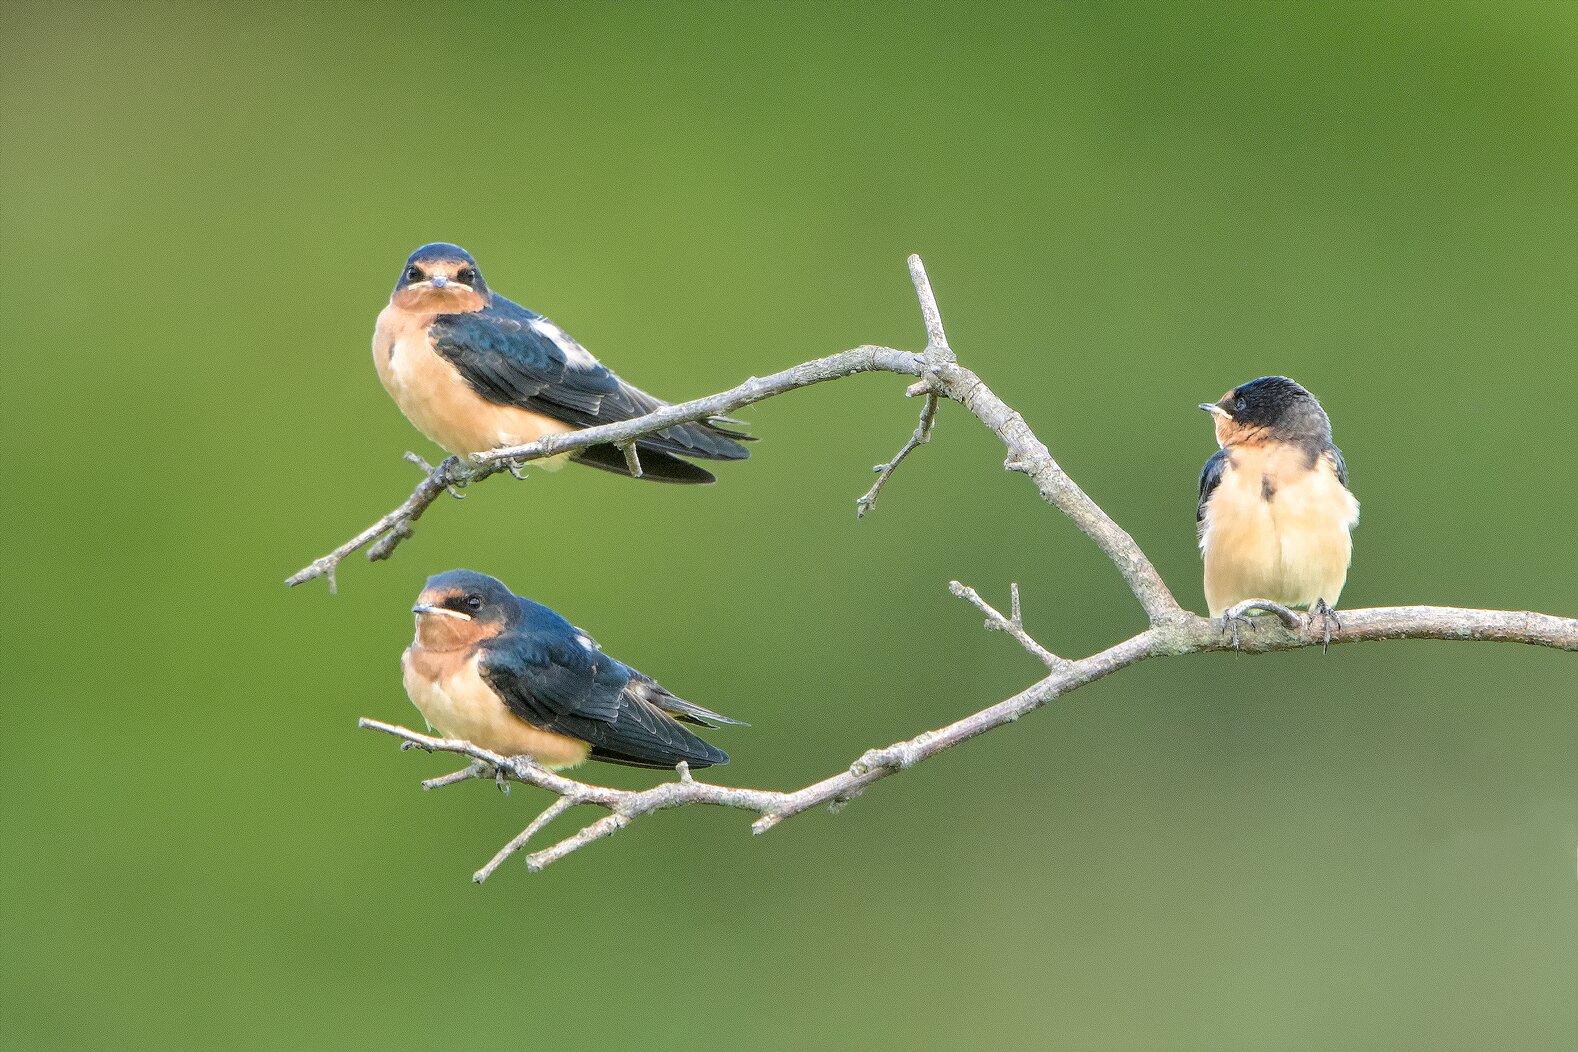 Barn Swallows, not found nesting in Central Park in 1998, were confirmed as breeding in 2008. In 2020, this species was confirmed nesting in all five boroughs of New York City by volunteers for the NY State Breeding Bird Atlas. Photo: Lloyd Spitalnik